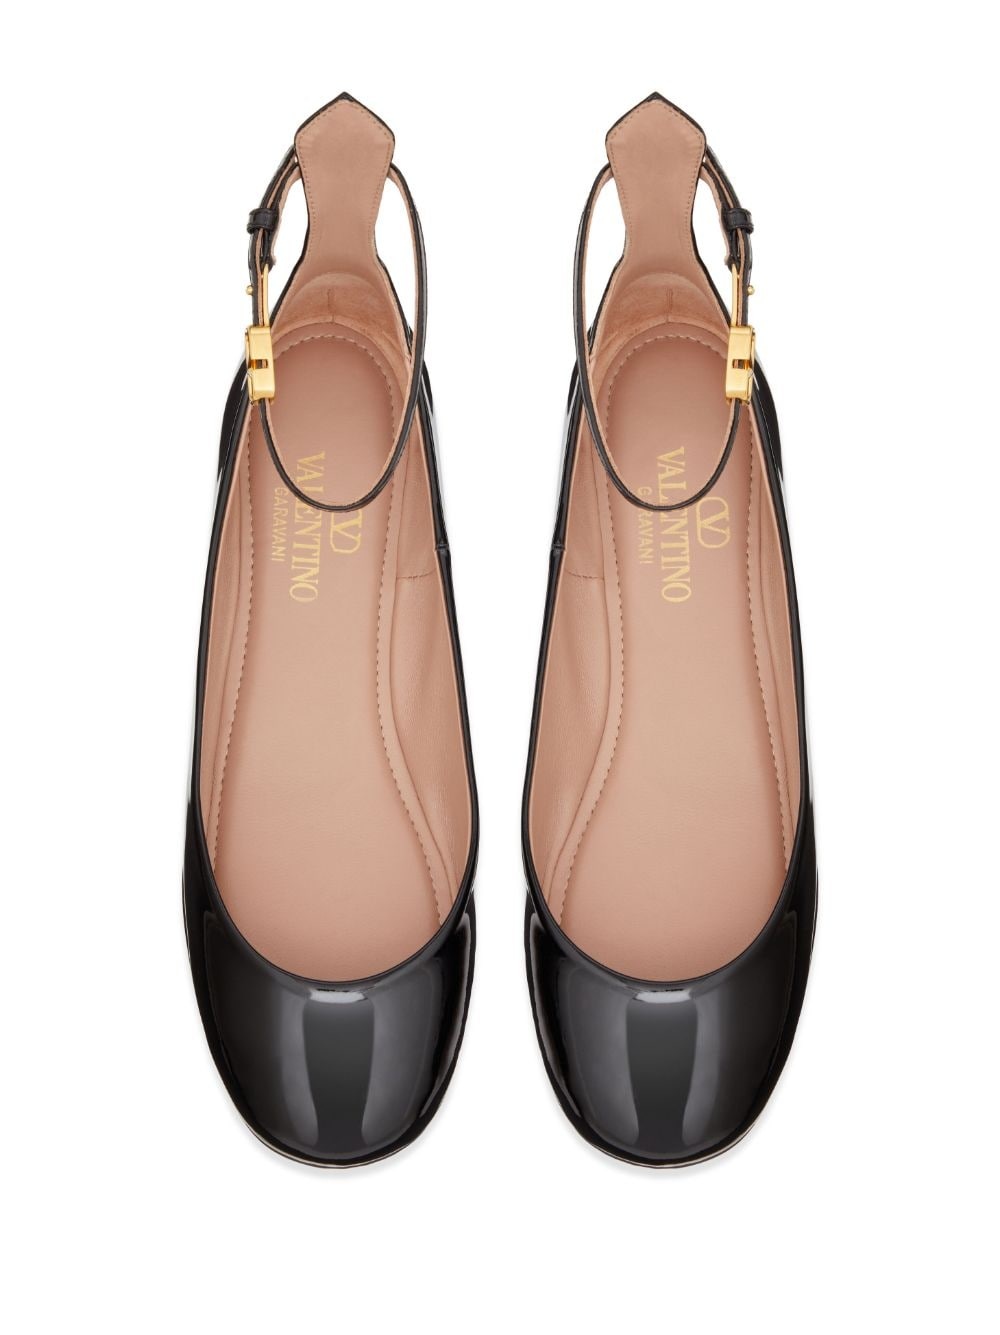 Tan-Go patent-leather ballerina shoes - 4